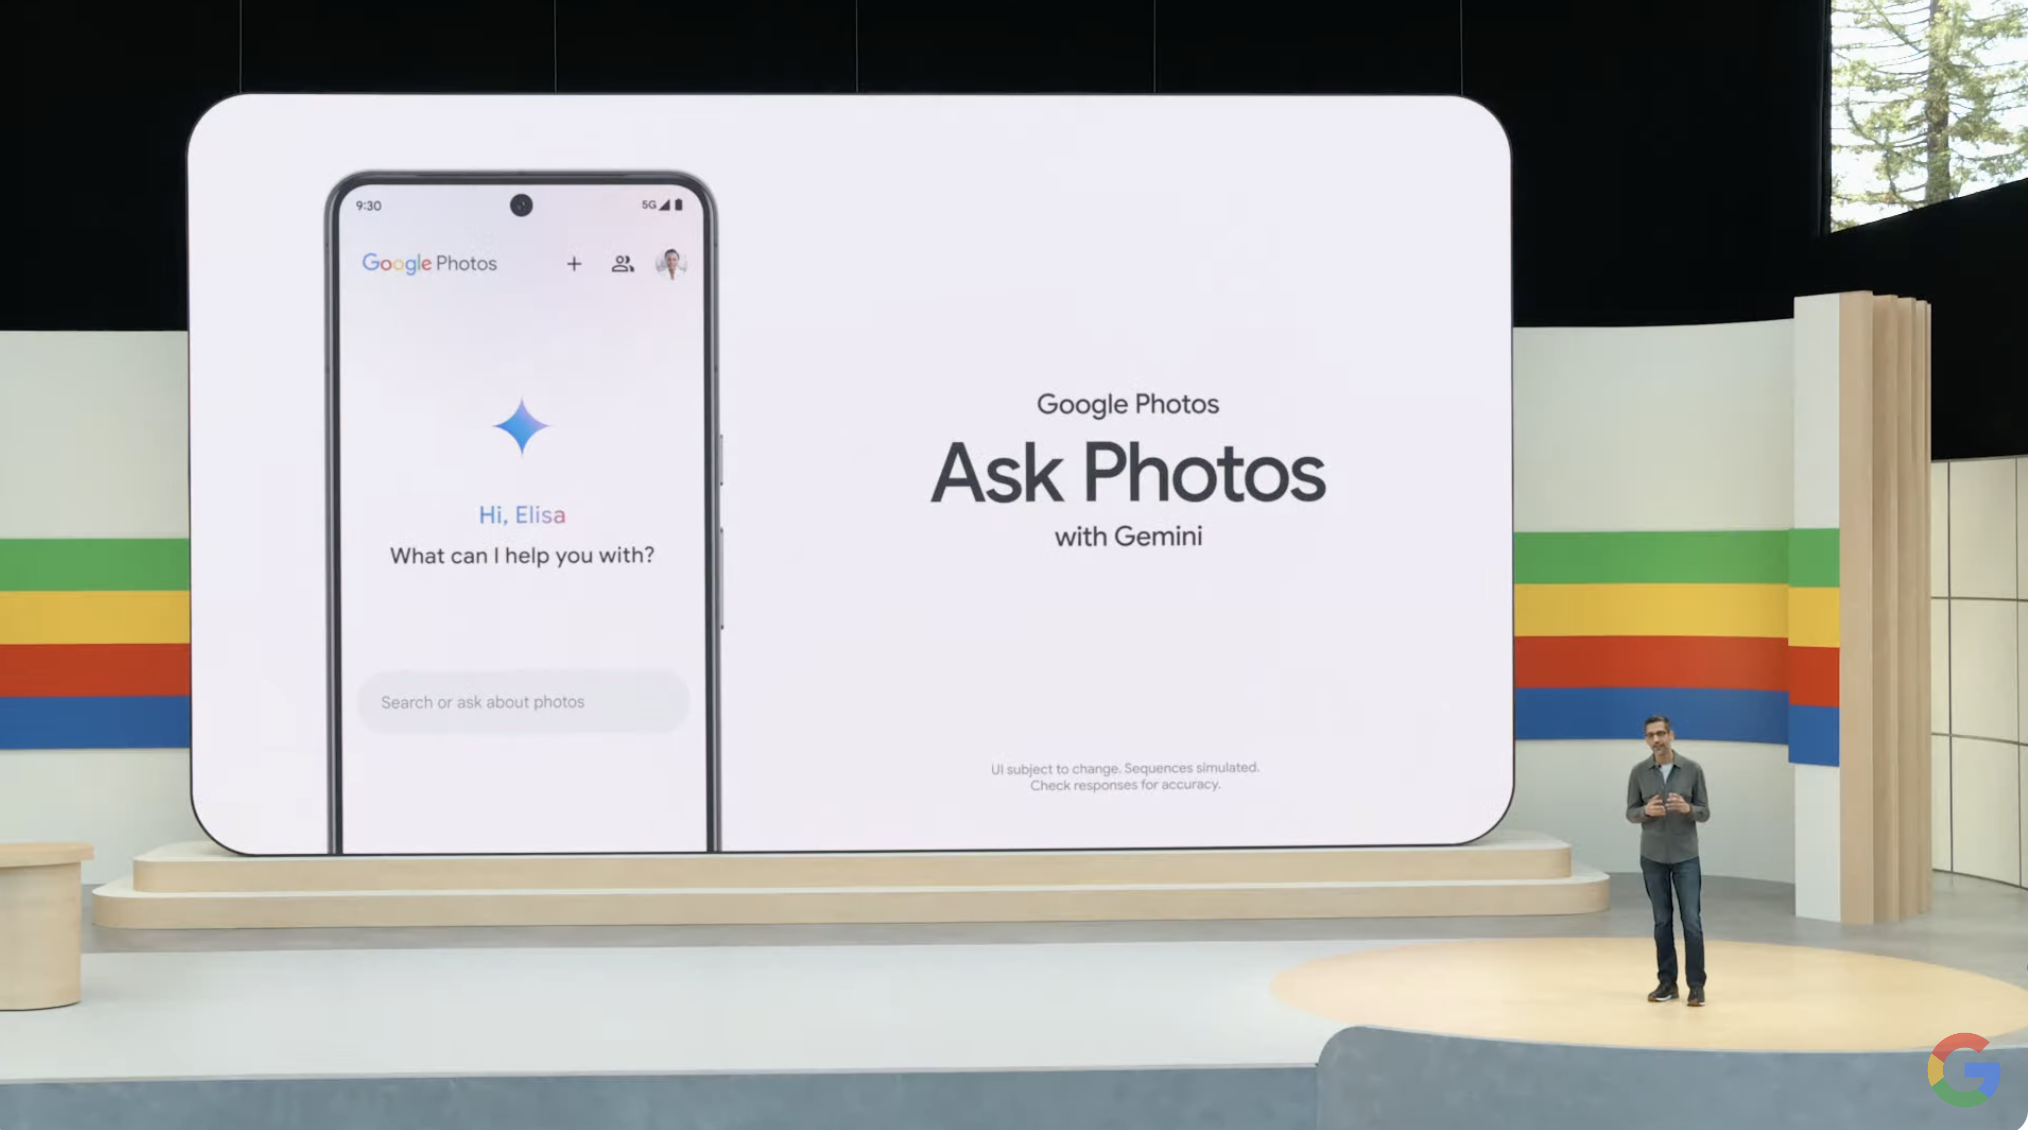 A mobile phone with the Google Photos logo on screen.